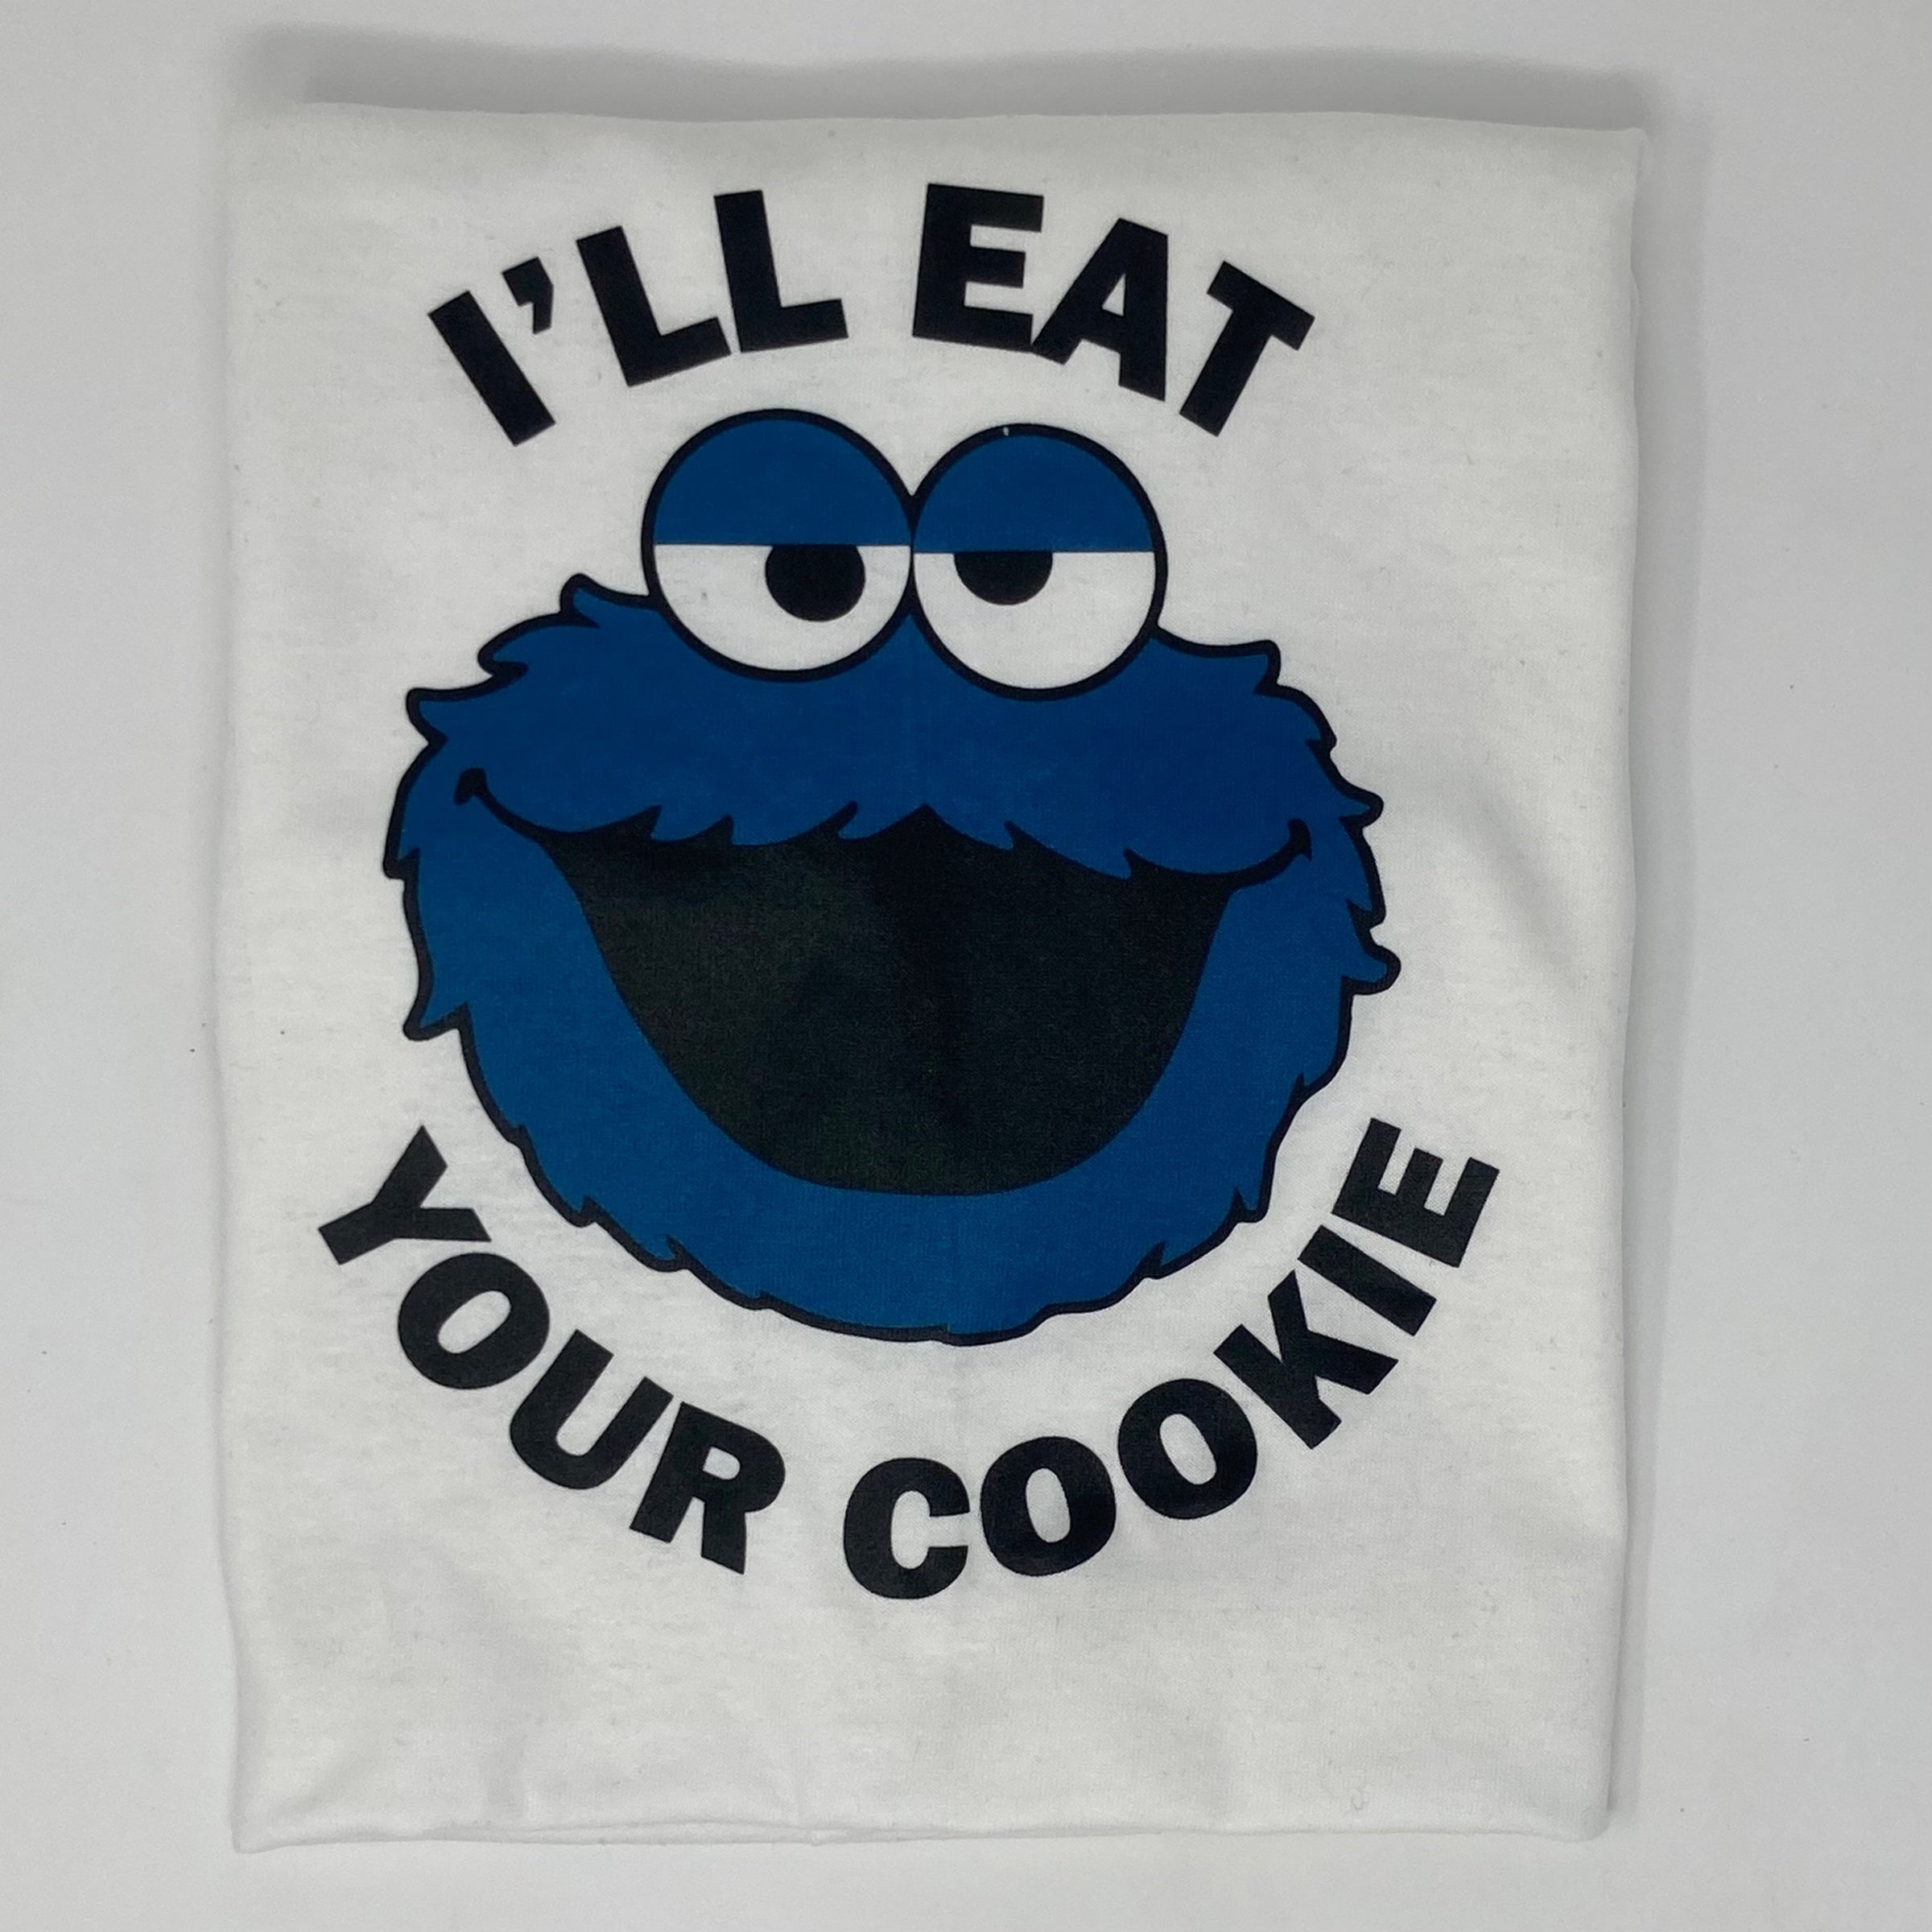 Red Sox Cookie Monster 2022 Shirt, Custom prints store